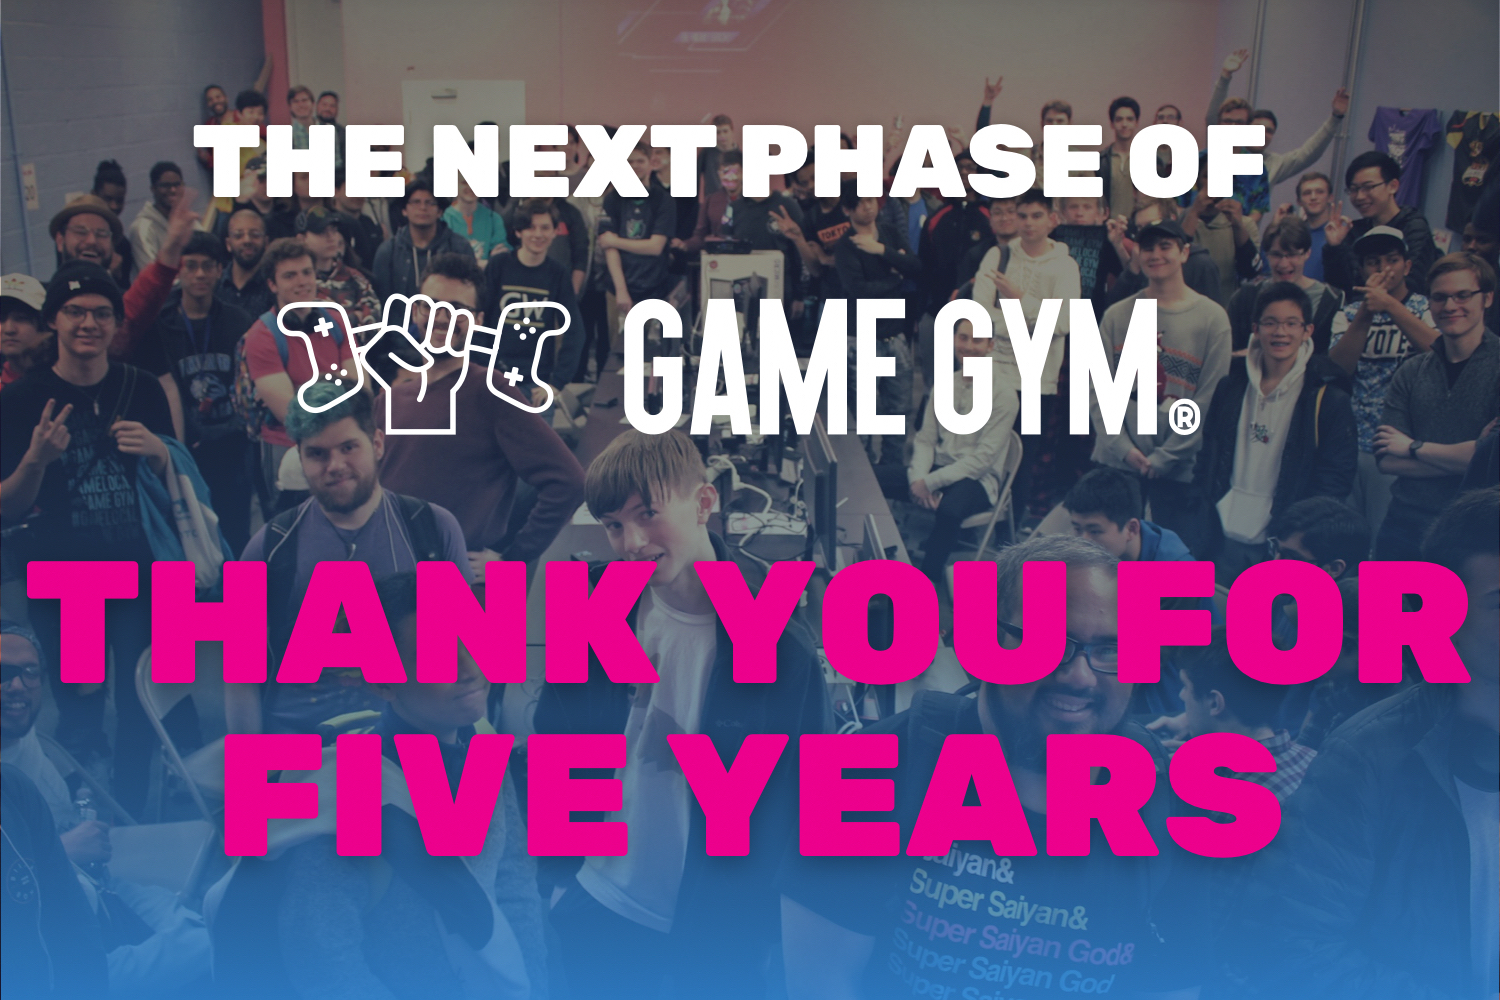 Thank you for five years. The Next Phase of Game Gym.